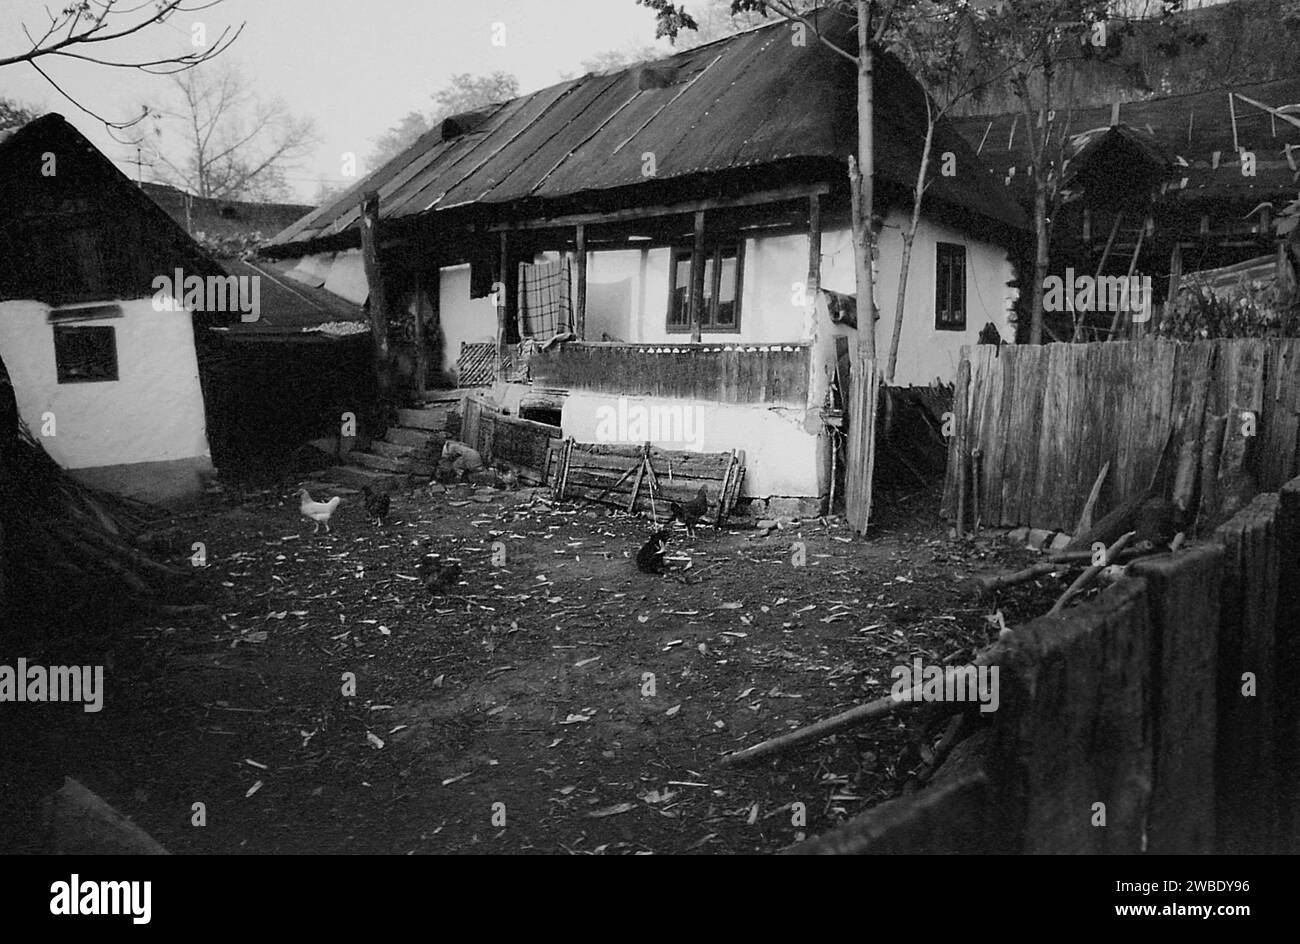 Vrancea County, Romania, approx. 1992. A traditional rural homestead with an enclosed yard. Stock Photo